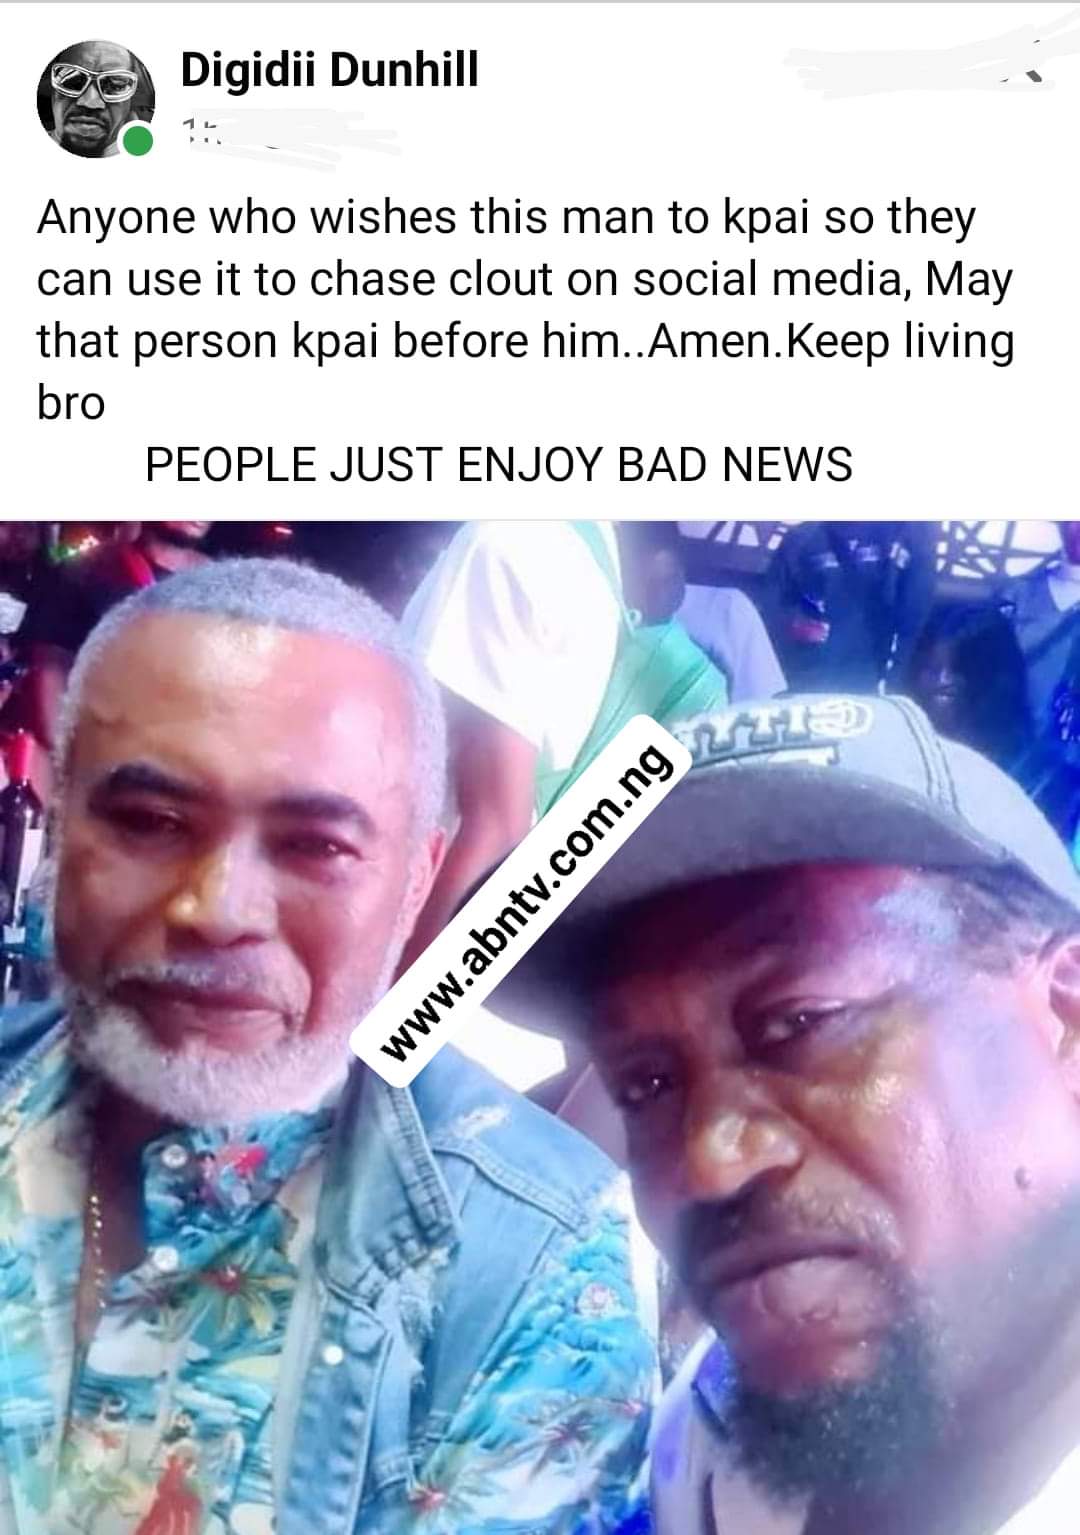 VIDEO: Those Wishing Zack Orji Dead Will D^e Before Him, Actor Dunhill Says